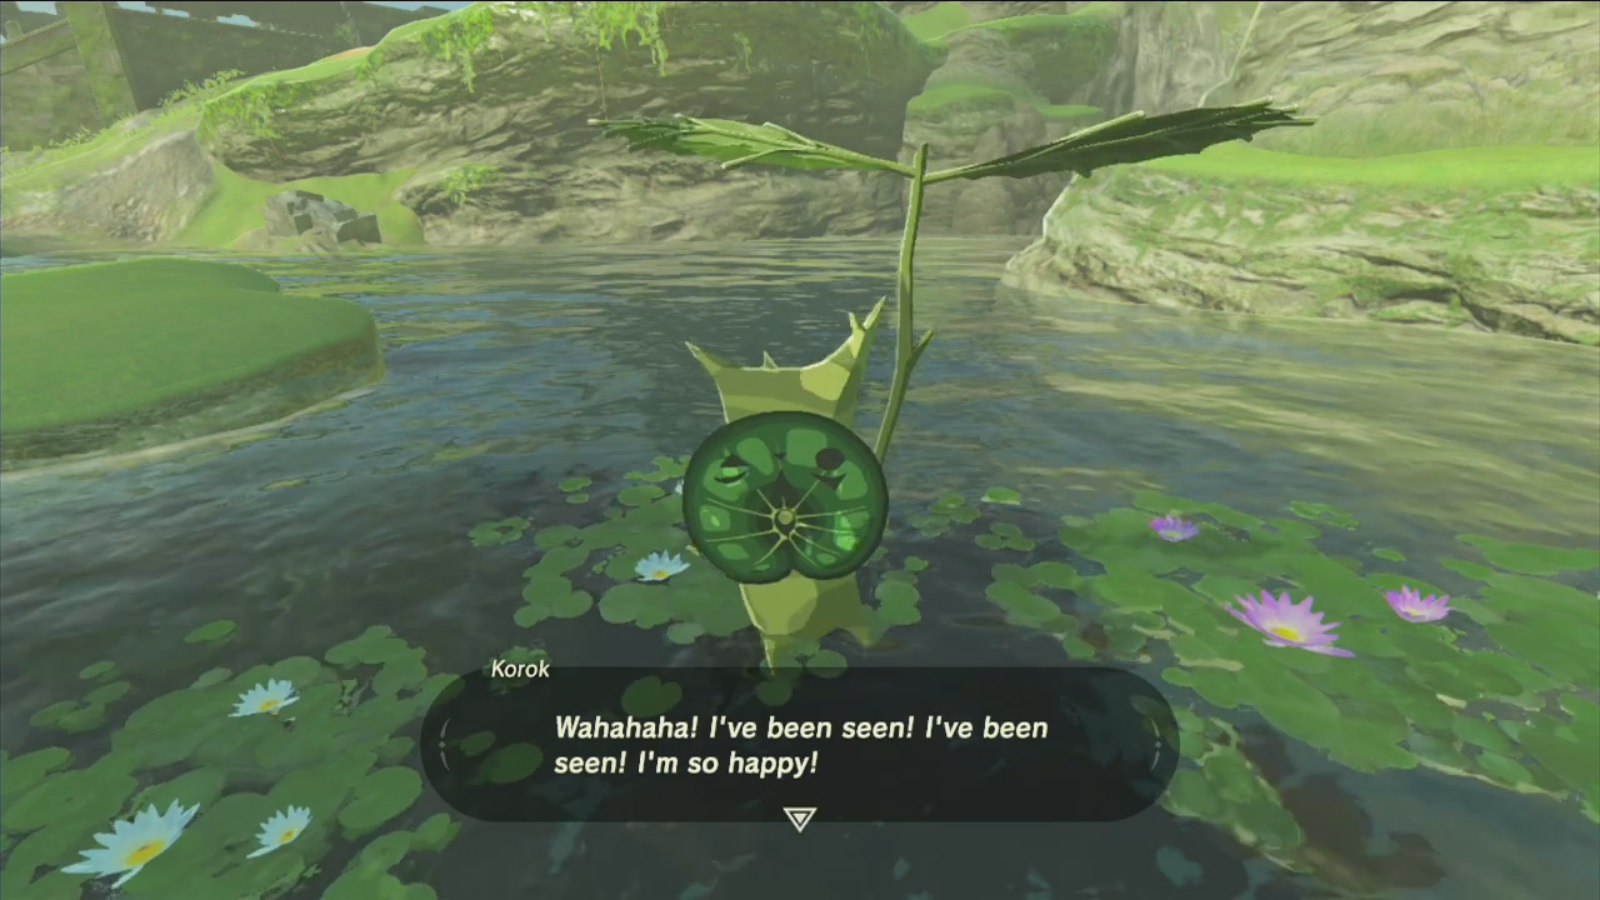 Zelda: Breath of the Wild DLC Pack 1 includes a Korok Mask to help